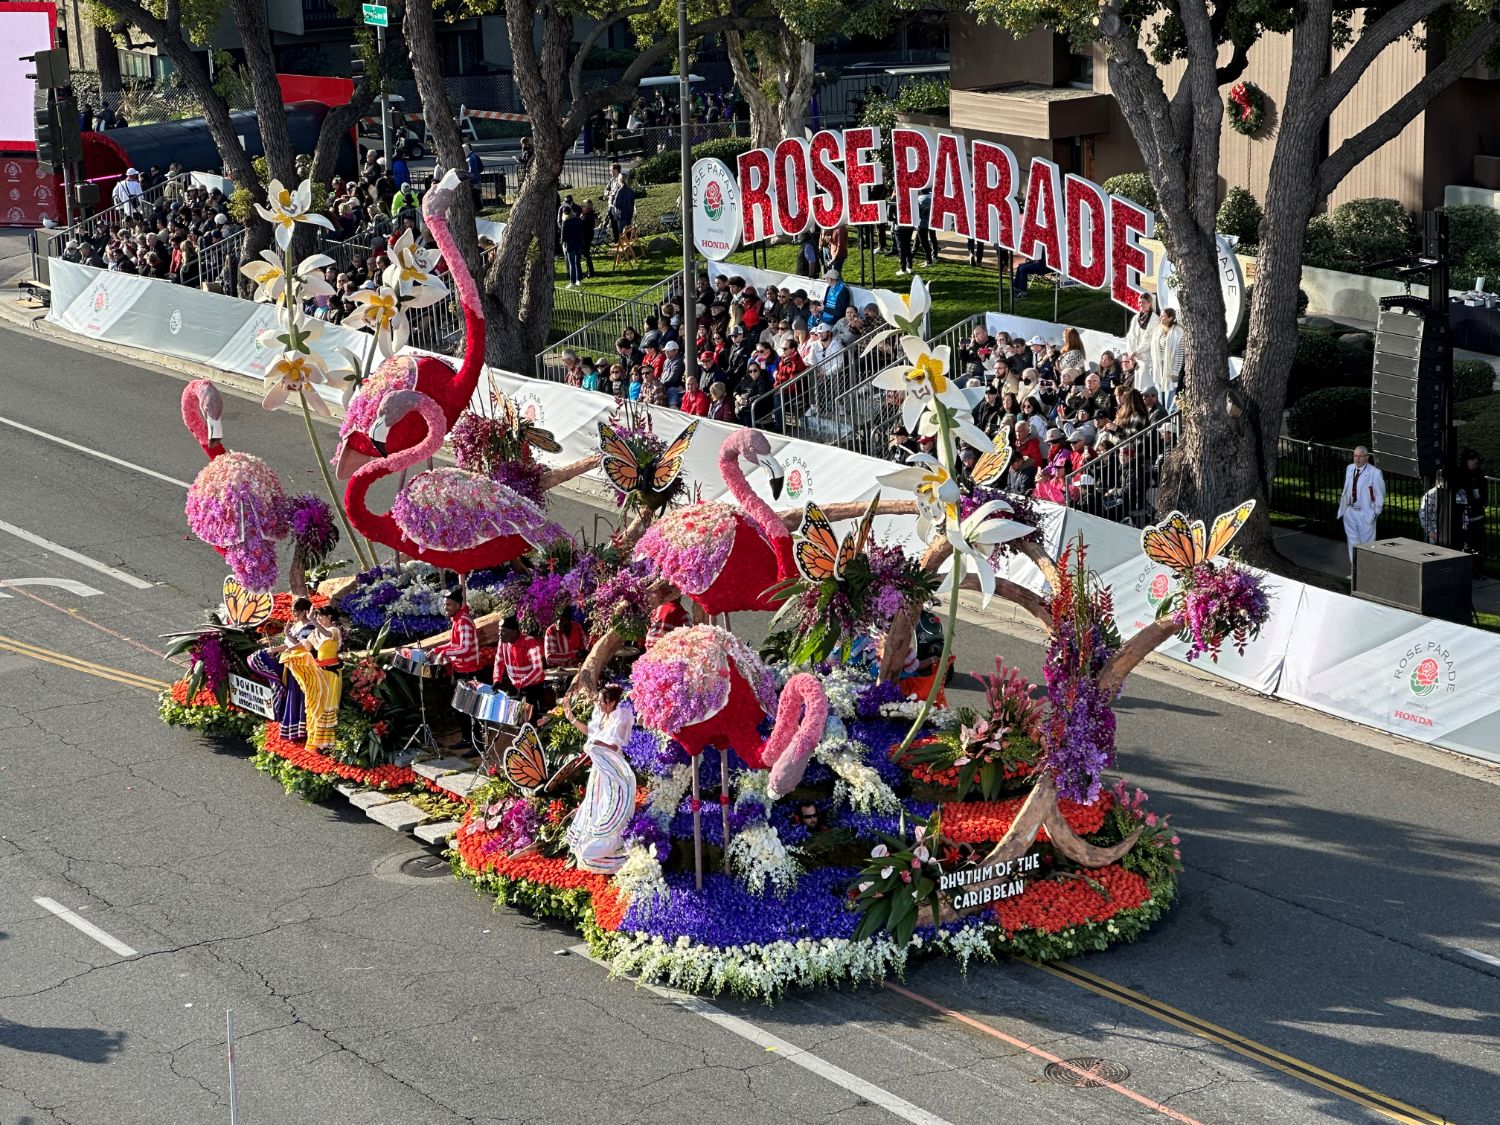 PHOTO: Bill Glazier | The South Pasadenan | Winning the Wrigley Legacy Award was the Downey Rose Float Association for its “Rhythm of the Caribbean” float. It won for outstanding display of floral presentation, float design and entertainment.